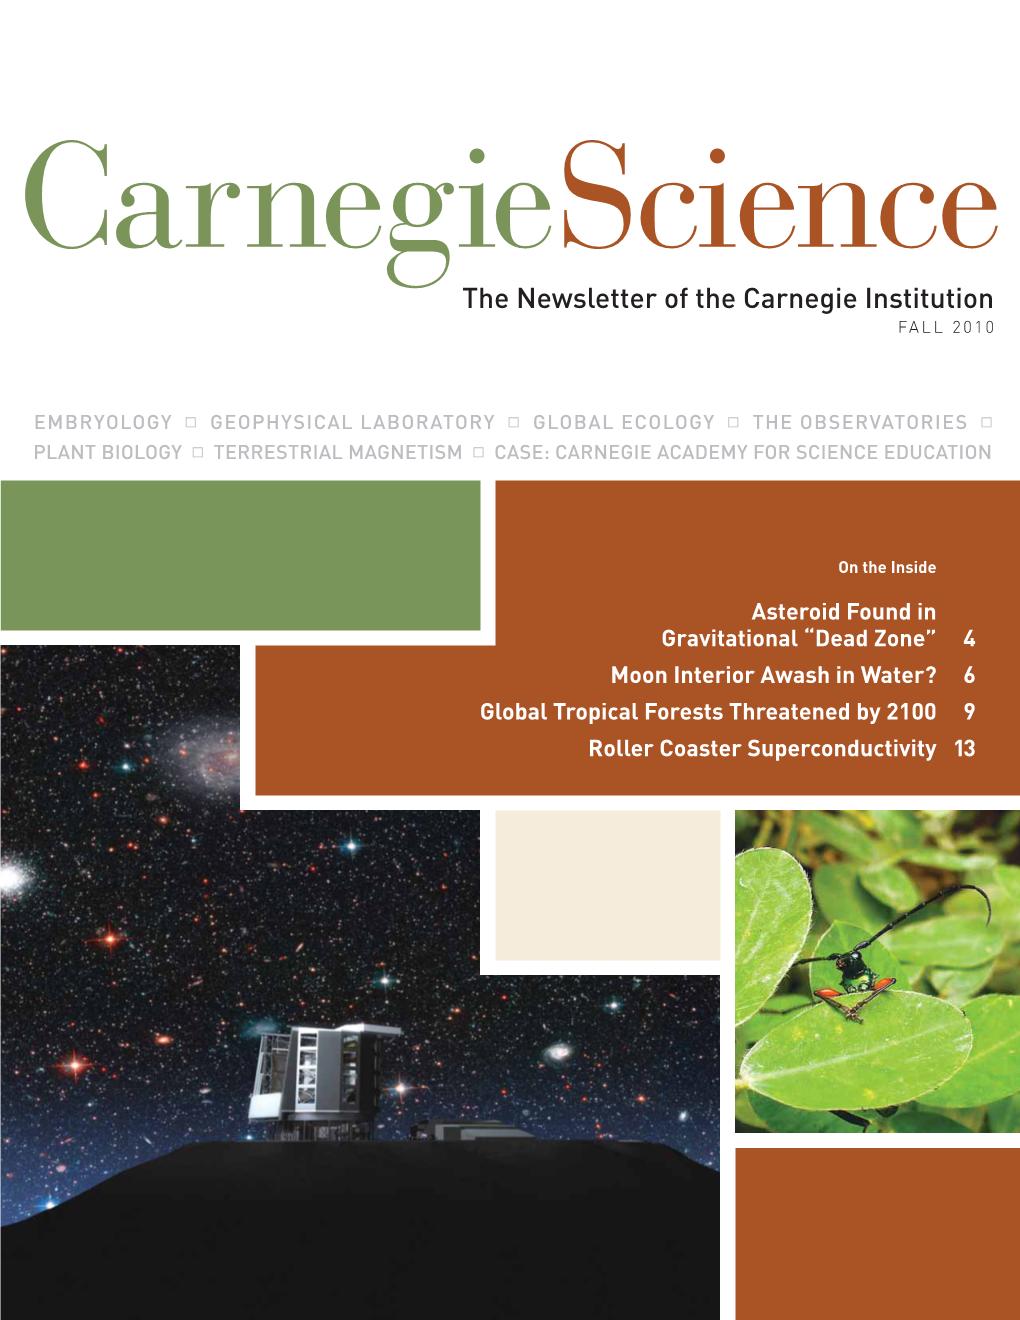 The Newsletter of the Carnegie Institution FALL 2010